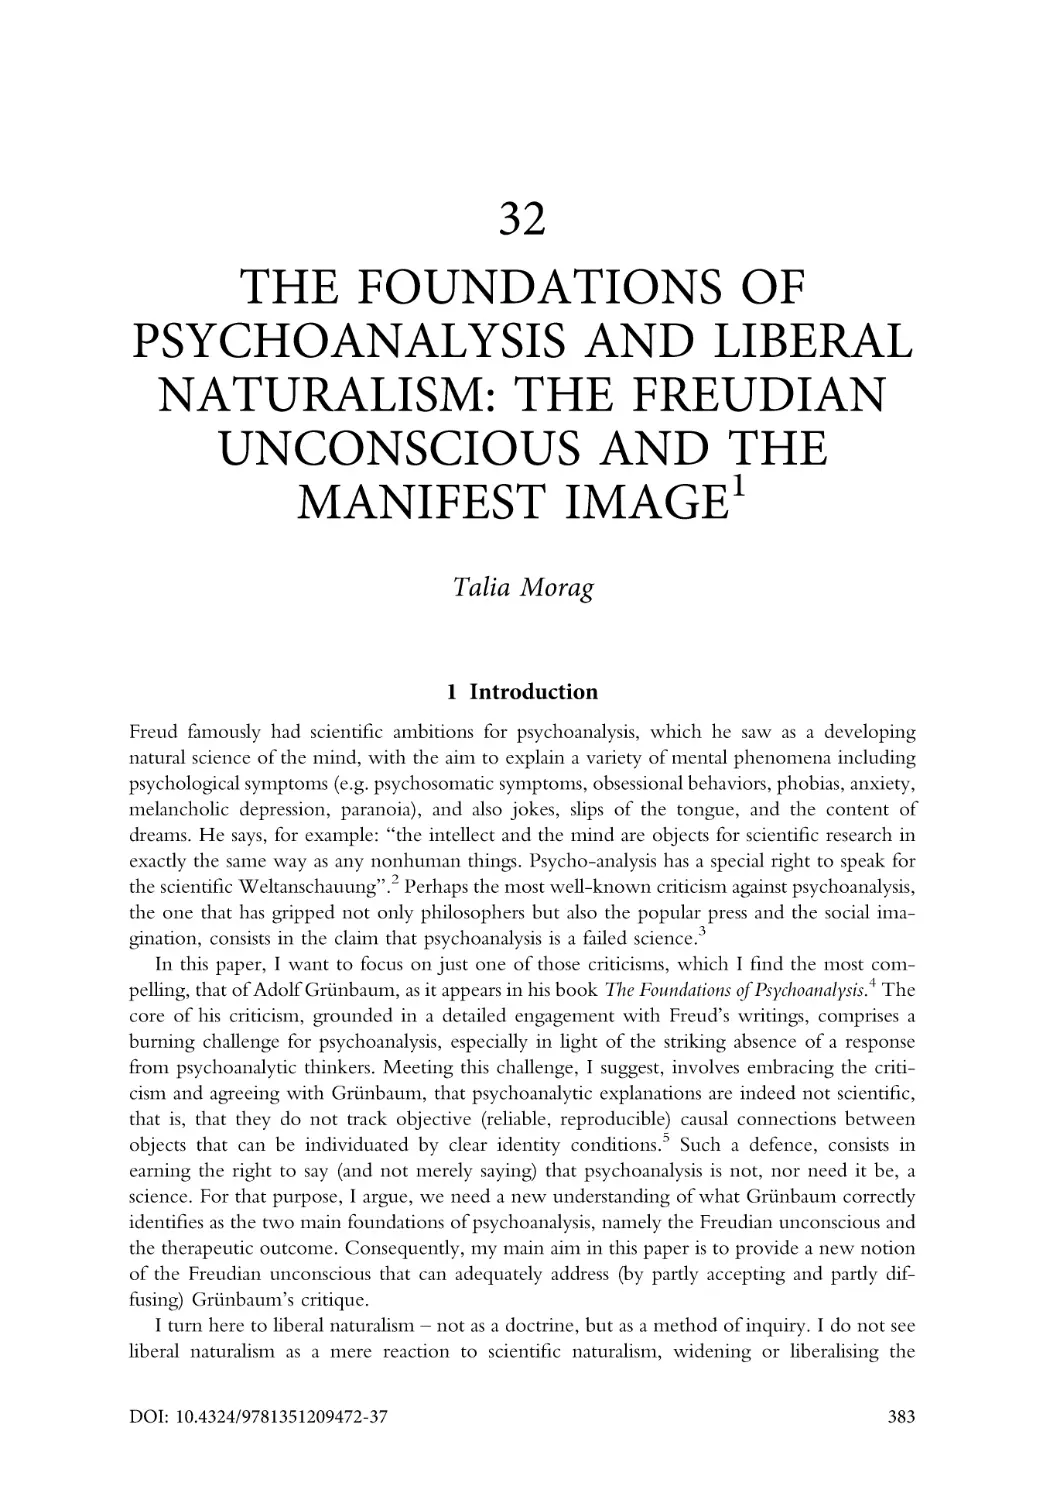 32. The foundations of psychoanalysis and liberal naturalism
1. Introduction